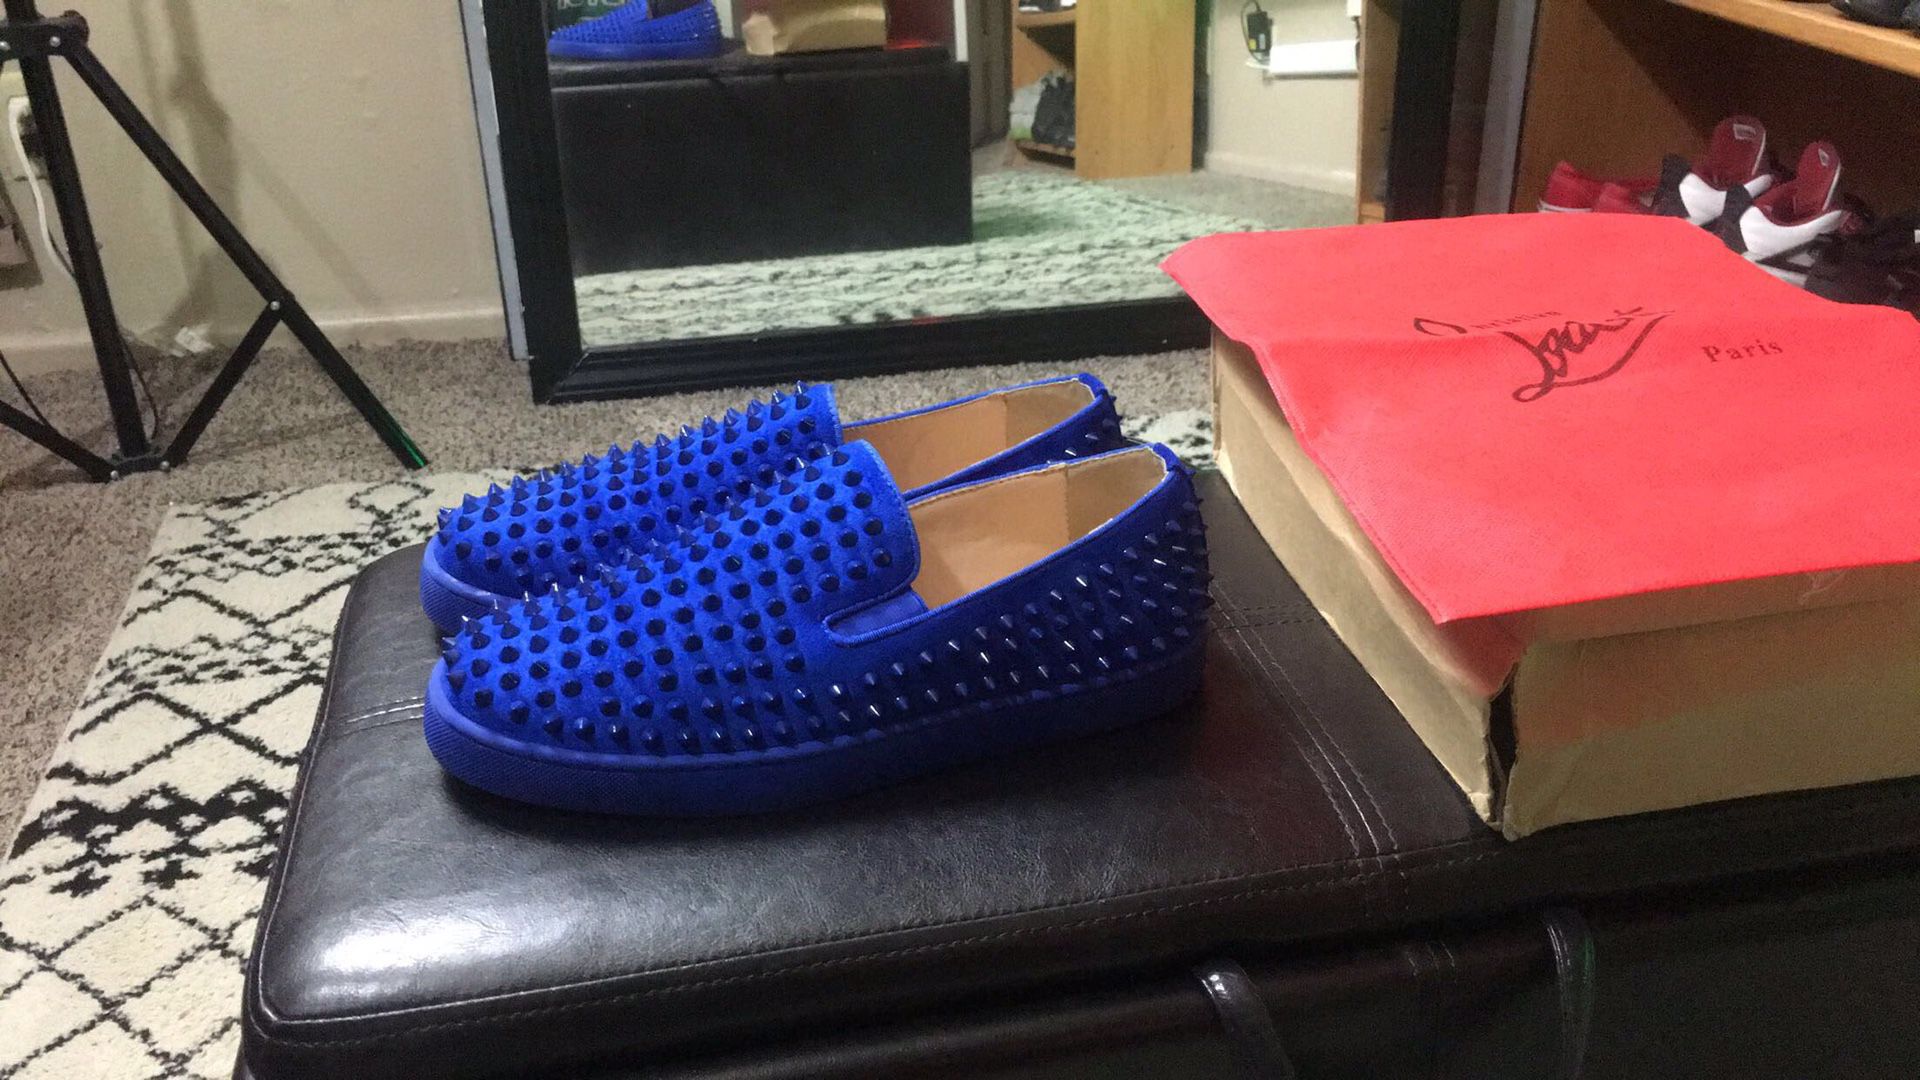 christian louboutin shoes for Sale in San Antonio, TX - OfferUp